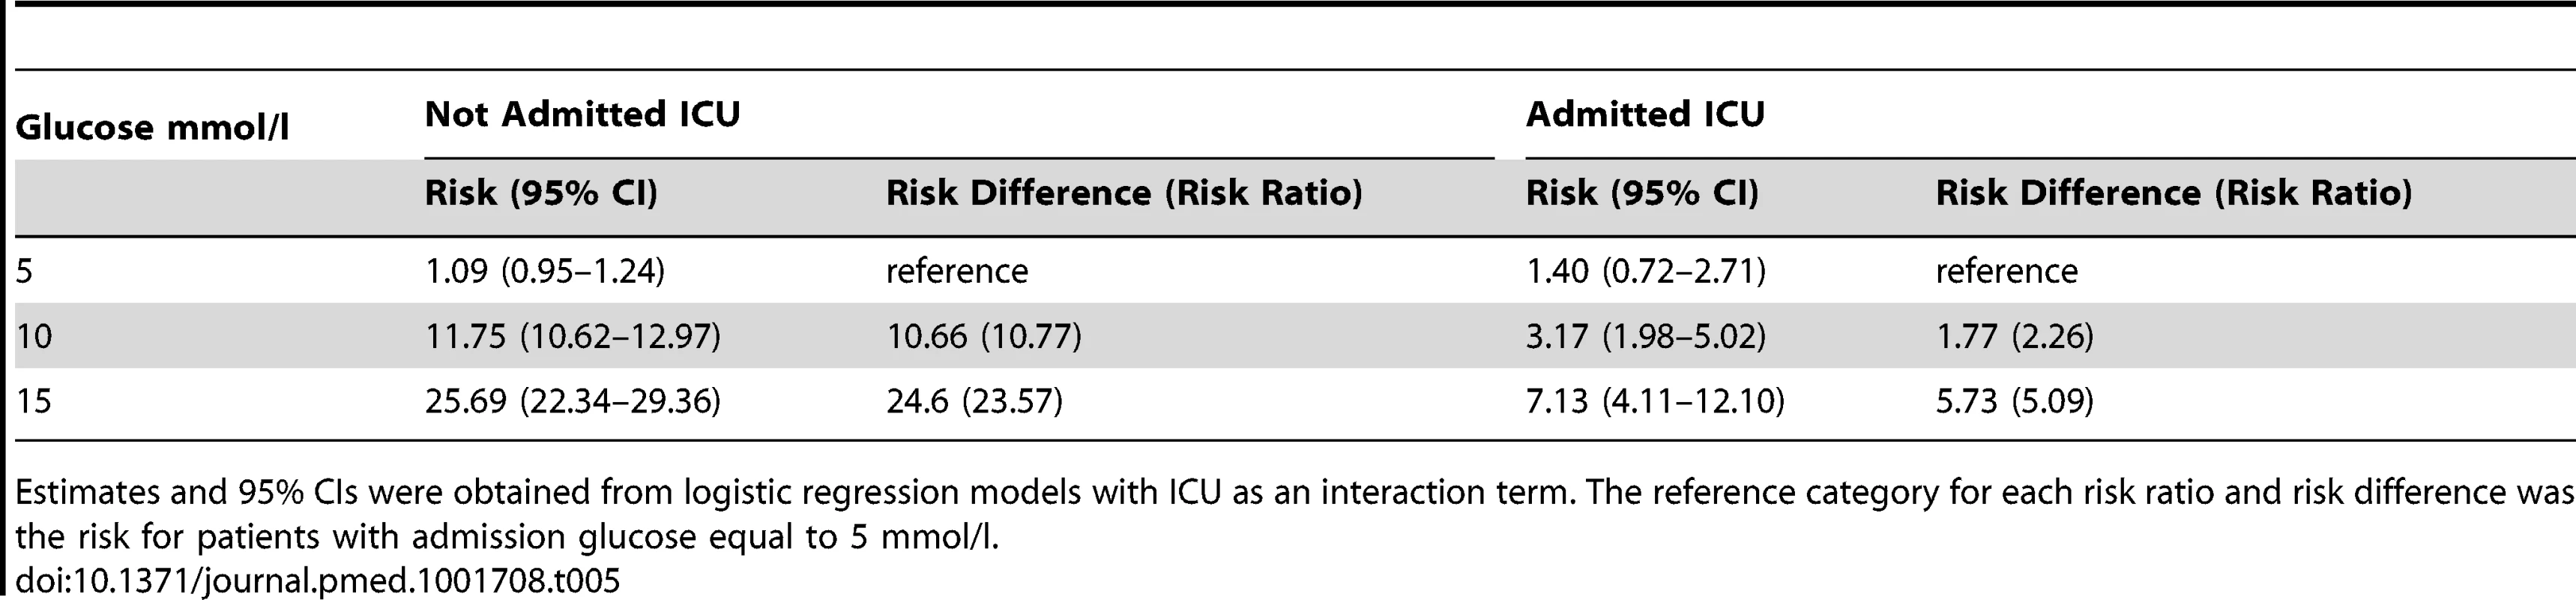 Predicted 3-year risk of type 2 diabetes in patients admitted to ICU compared to patients not admitted to ICU.